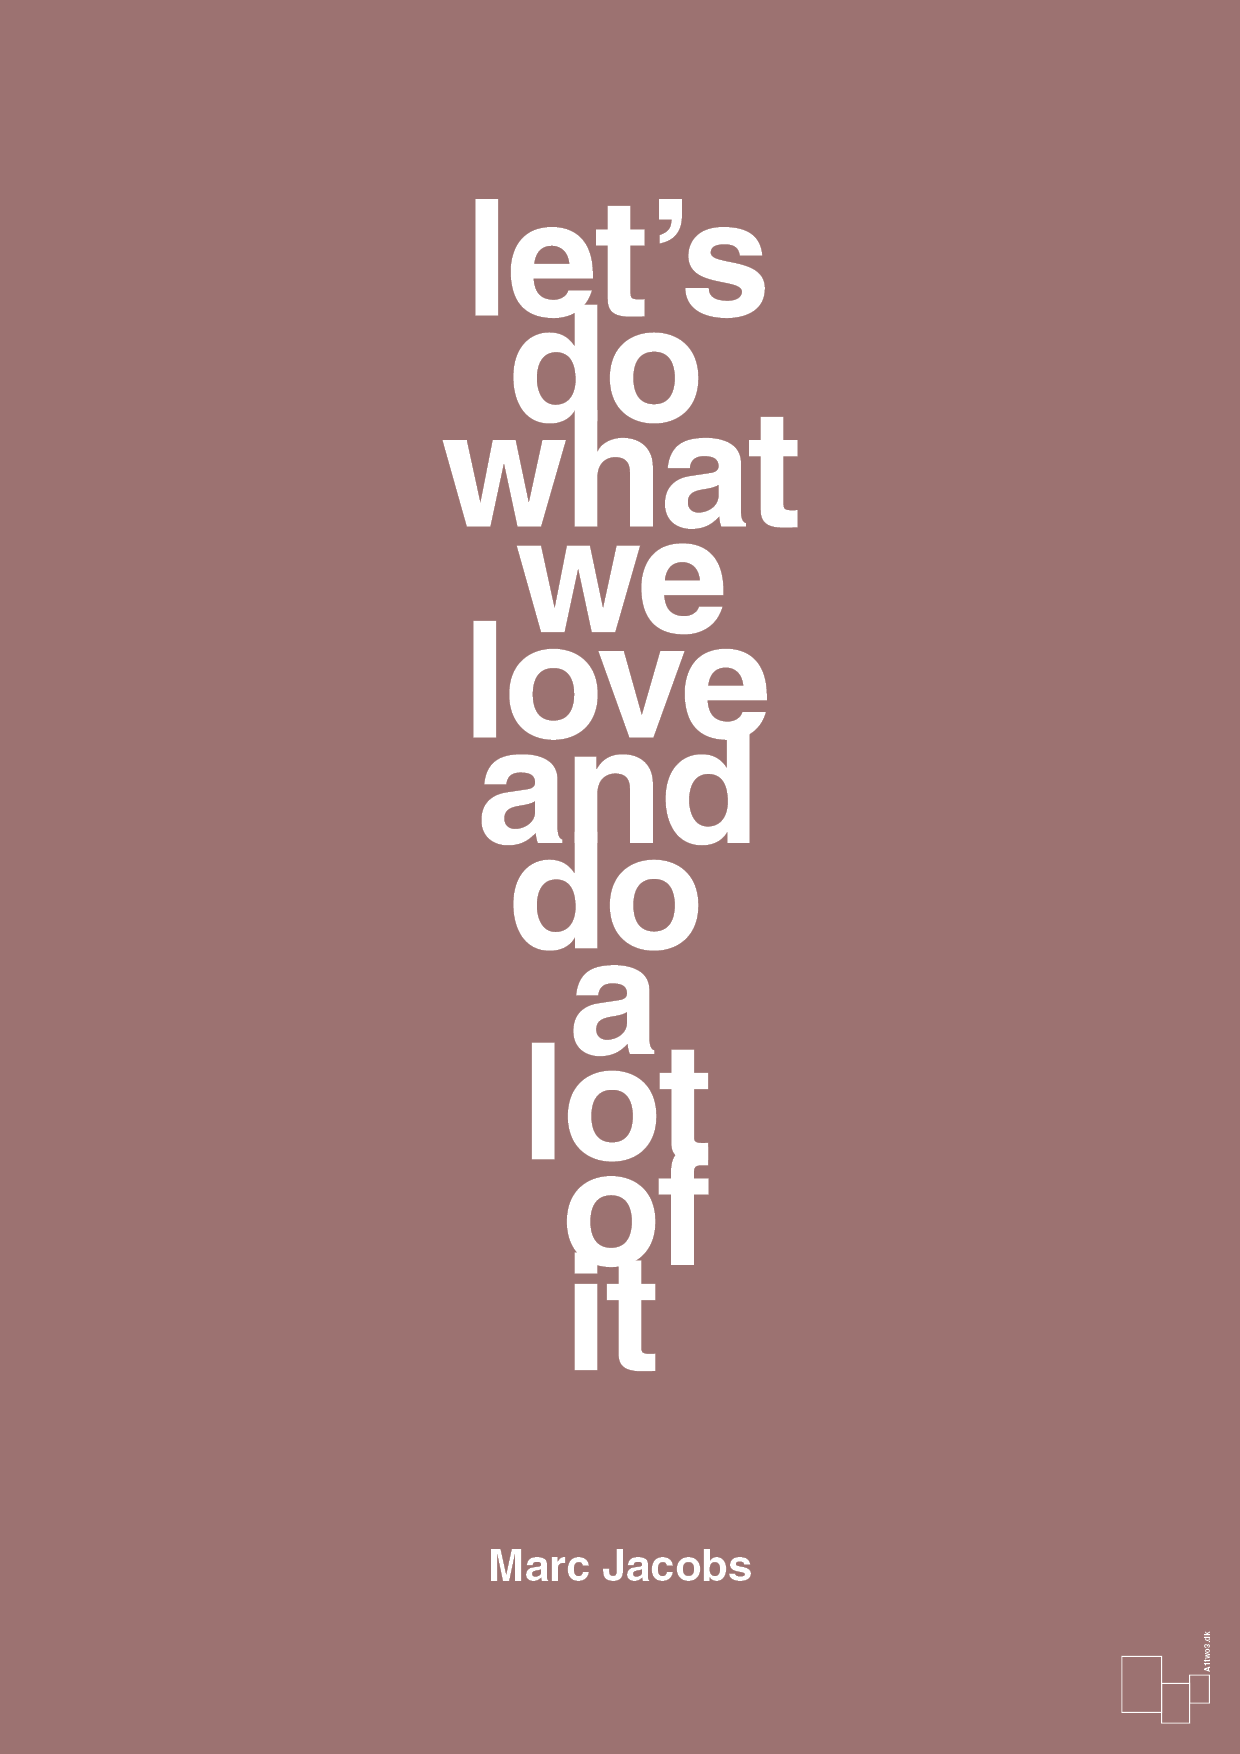 lets do what we love and do a lot of it - Plakat med Citater i Plum